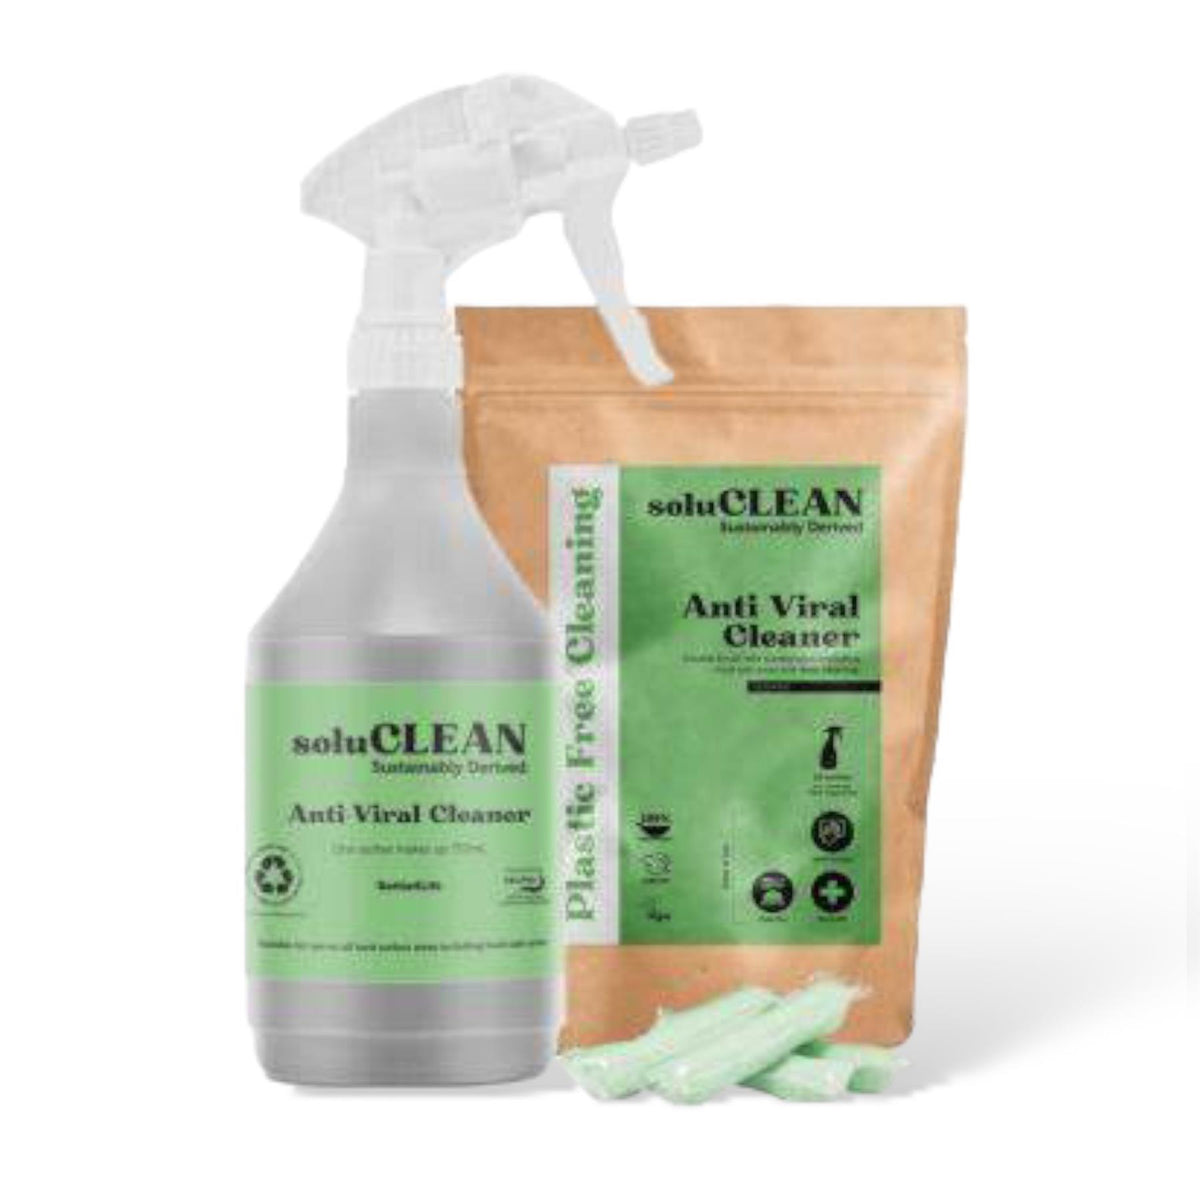 Soluclean, Starter Kit, Anti-Viral Cleaner, 750ml Reusable trigger Spray Bottle and One Packet of 10 Sachets, Plastic Free Cleaning